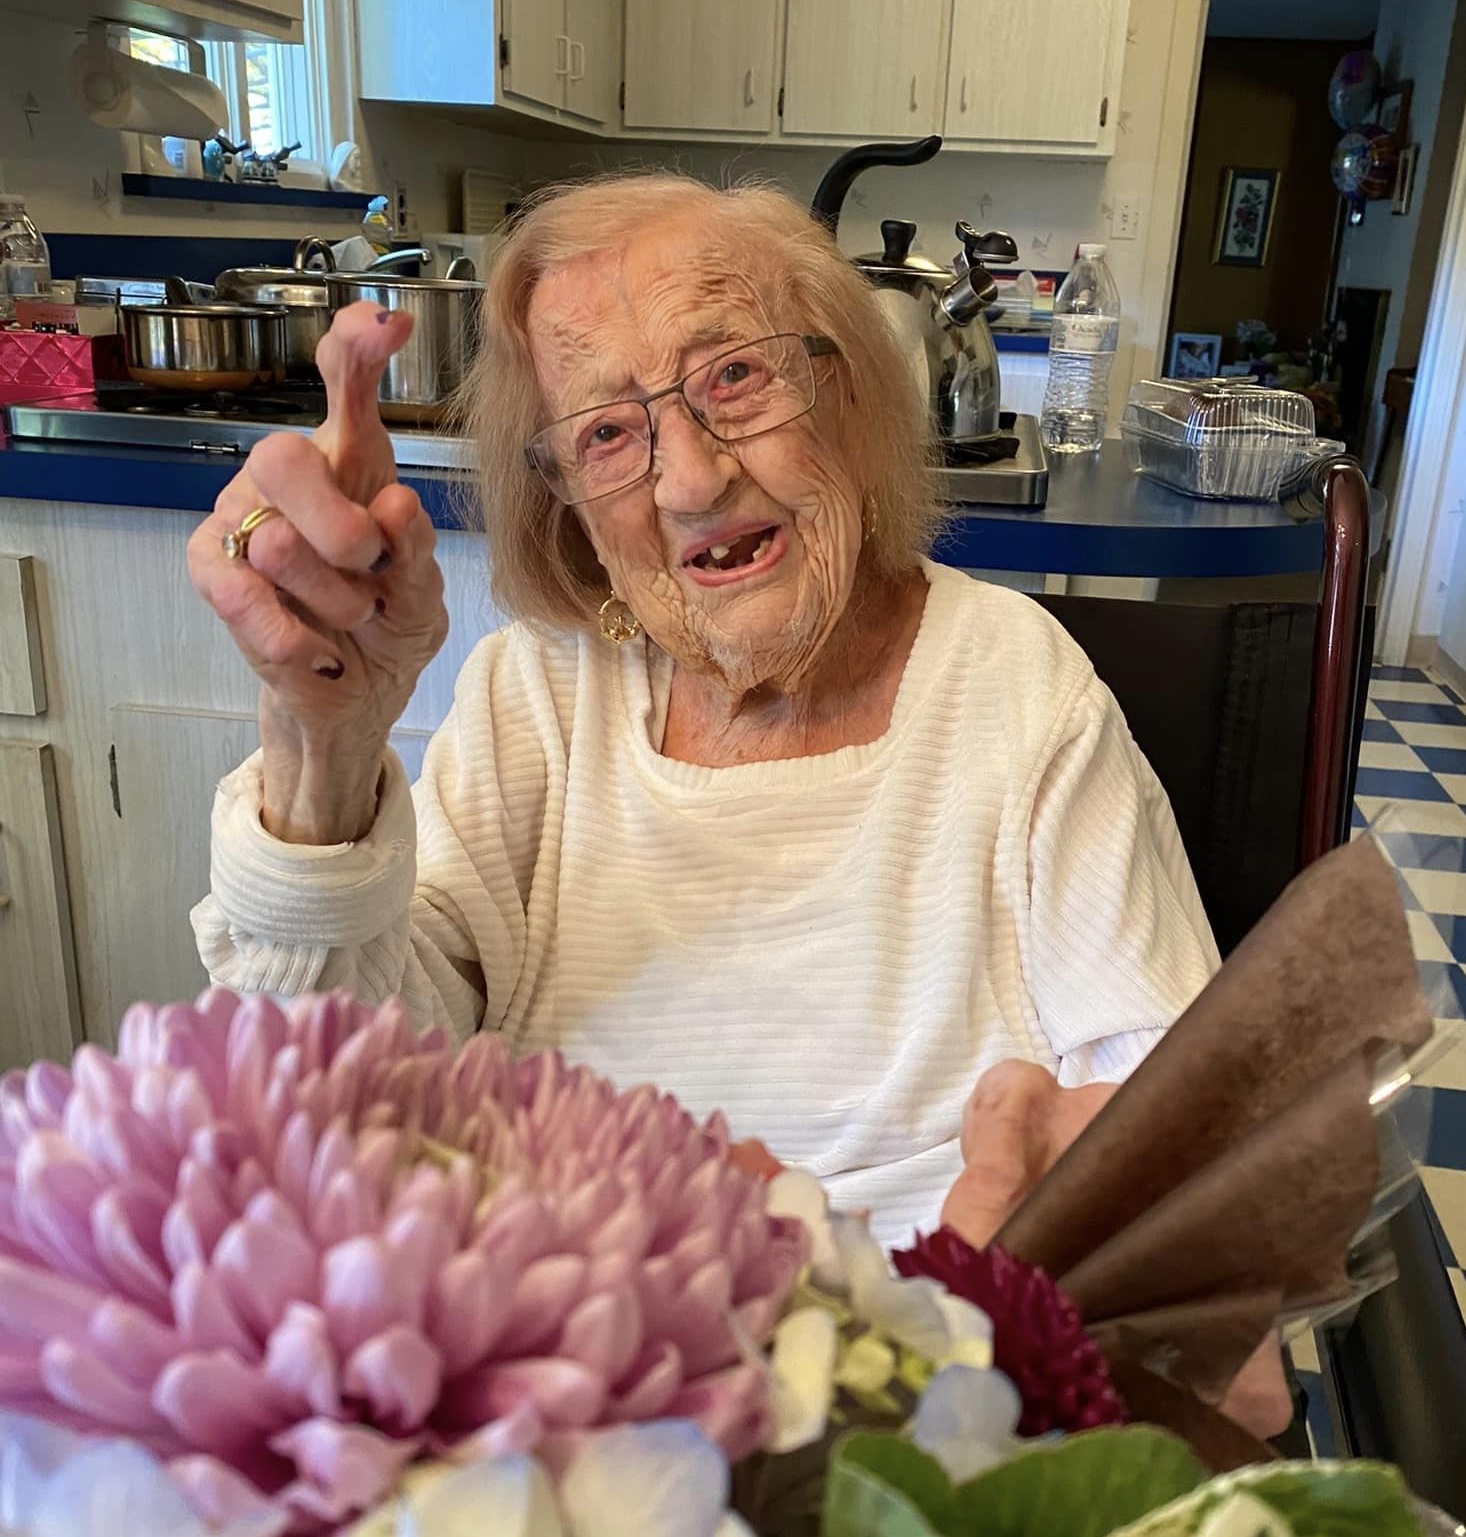 On her 110th birthday. (Source: Facebook/Allendale Police)